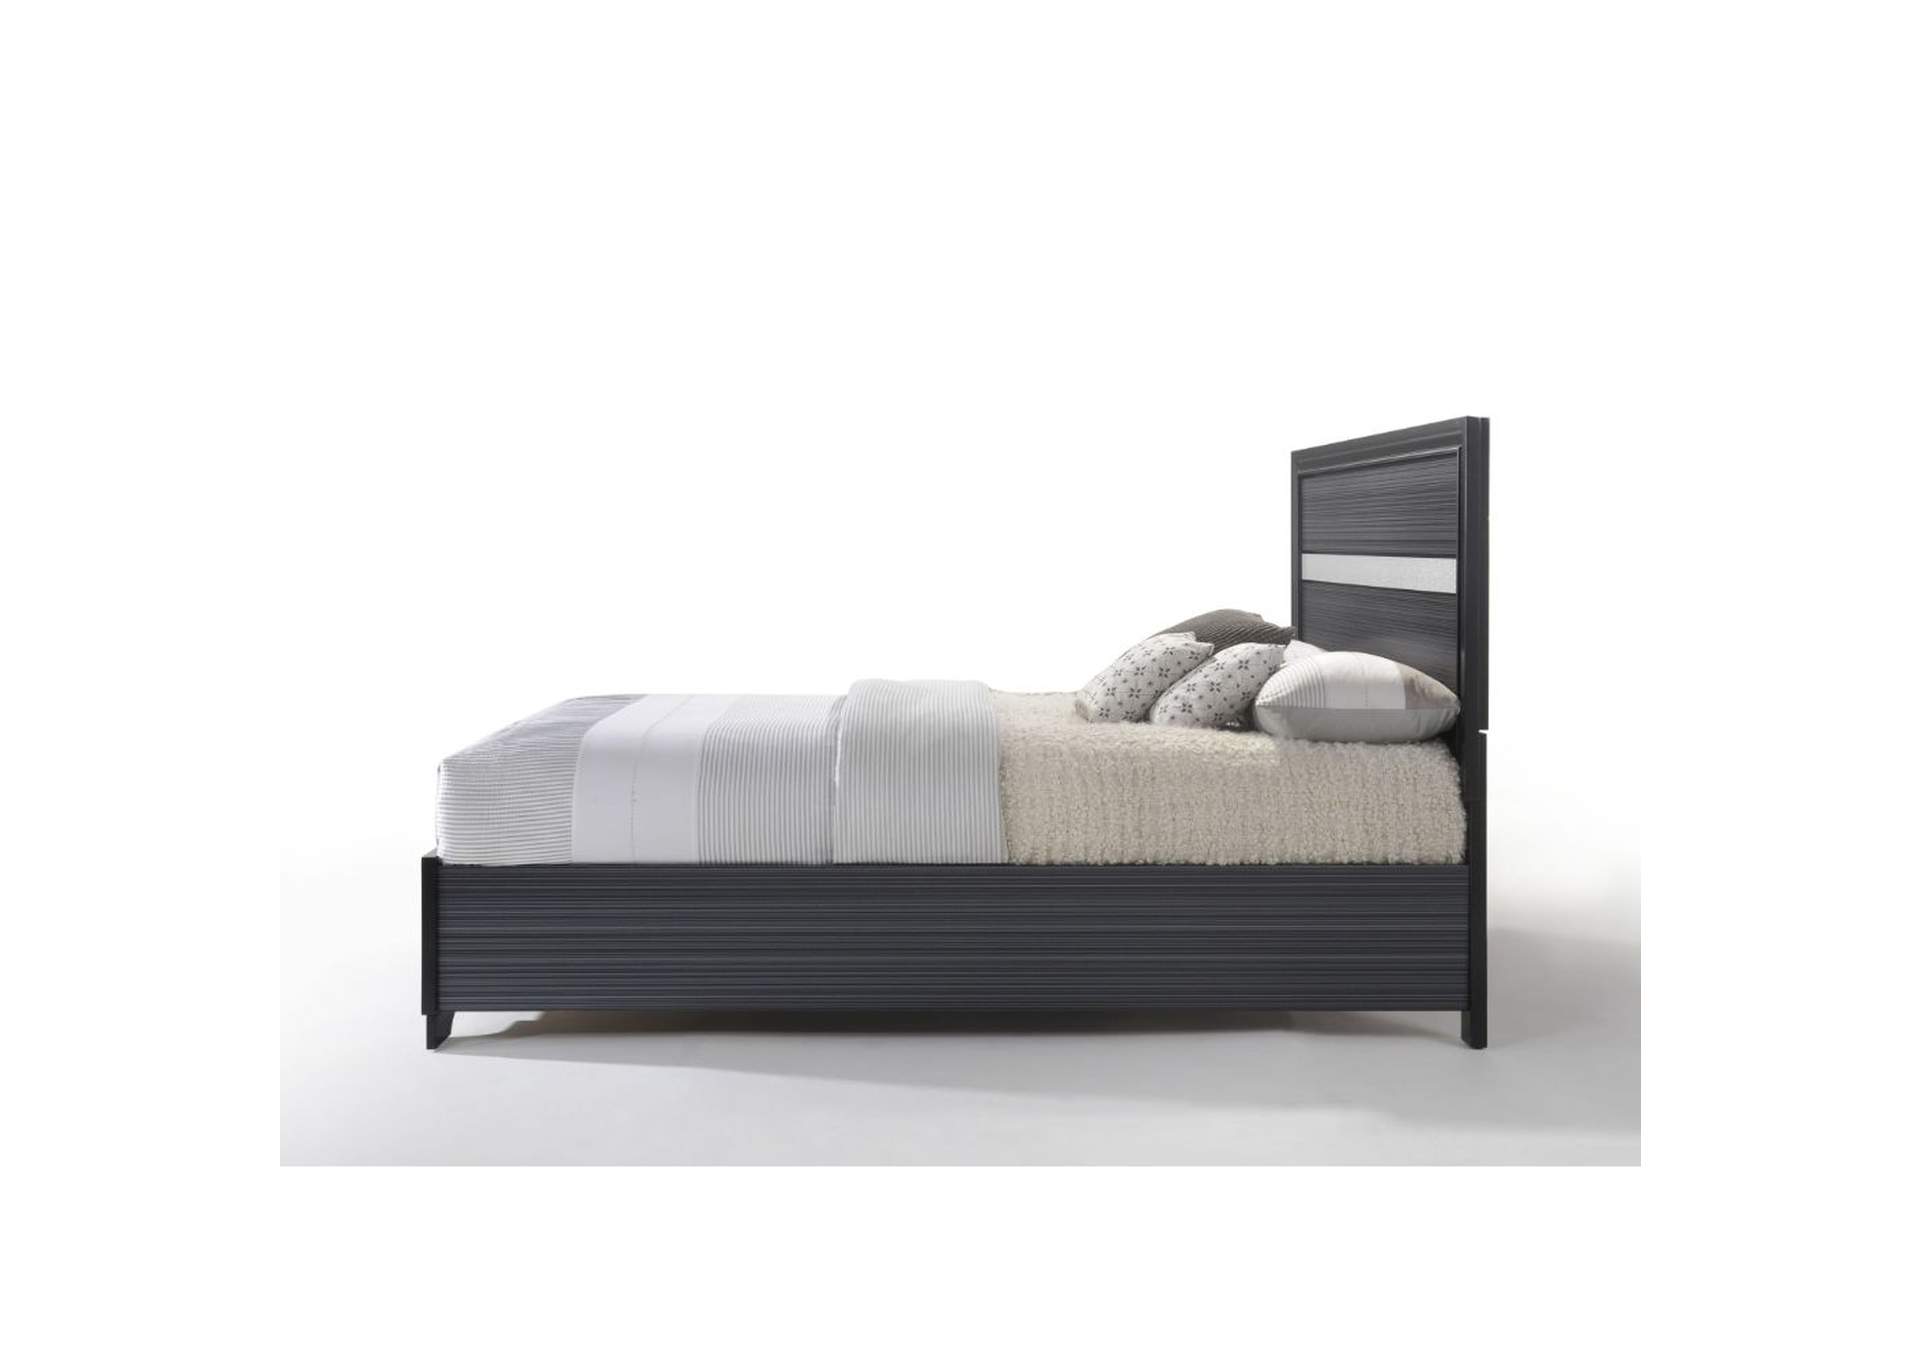 Naima Queen Bed,Acme